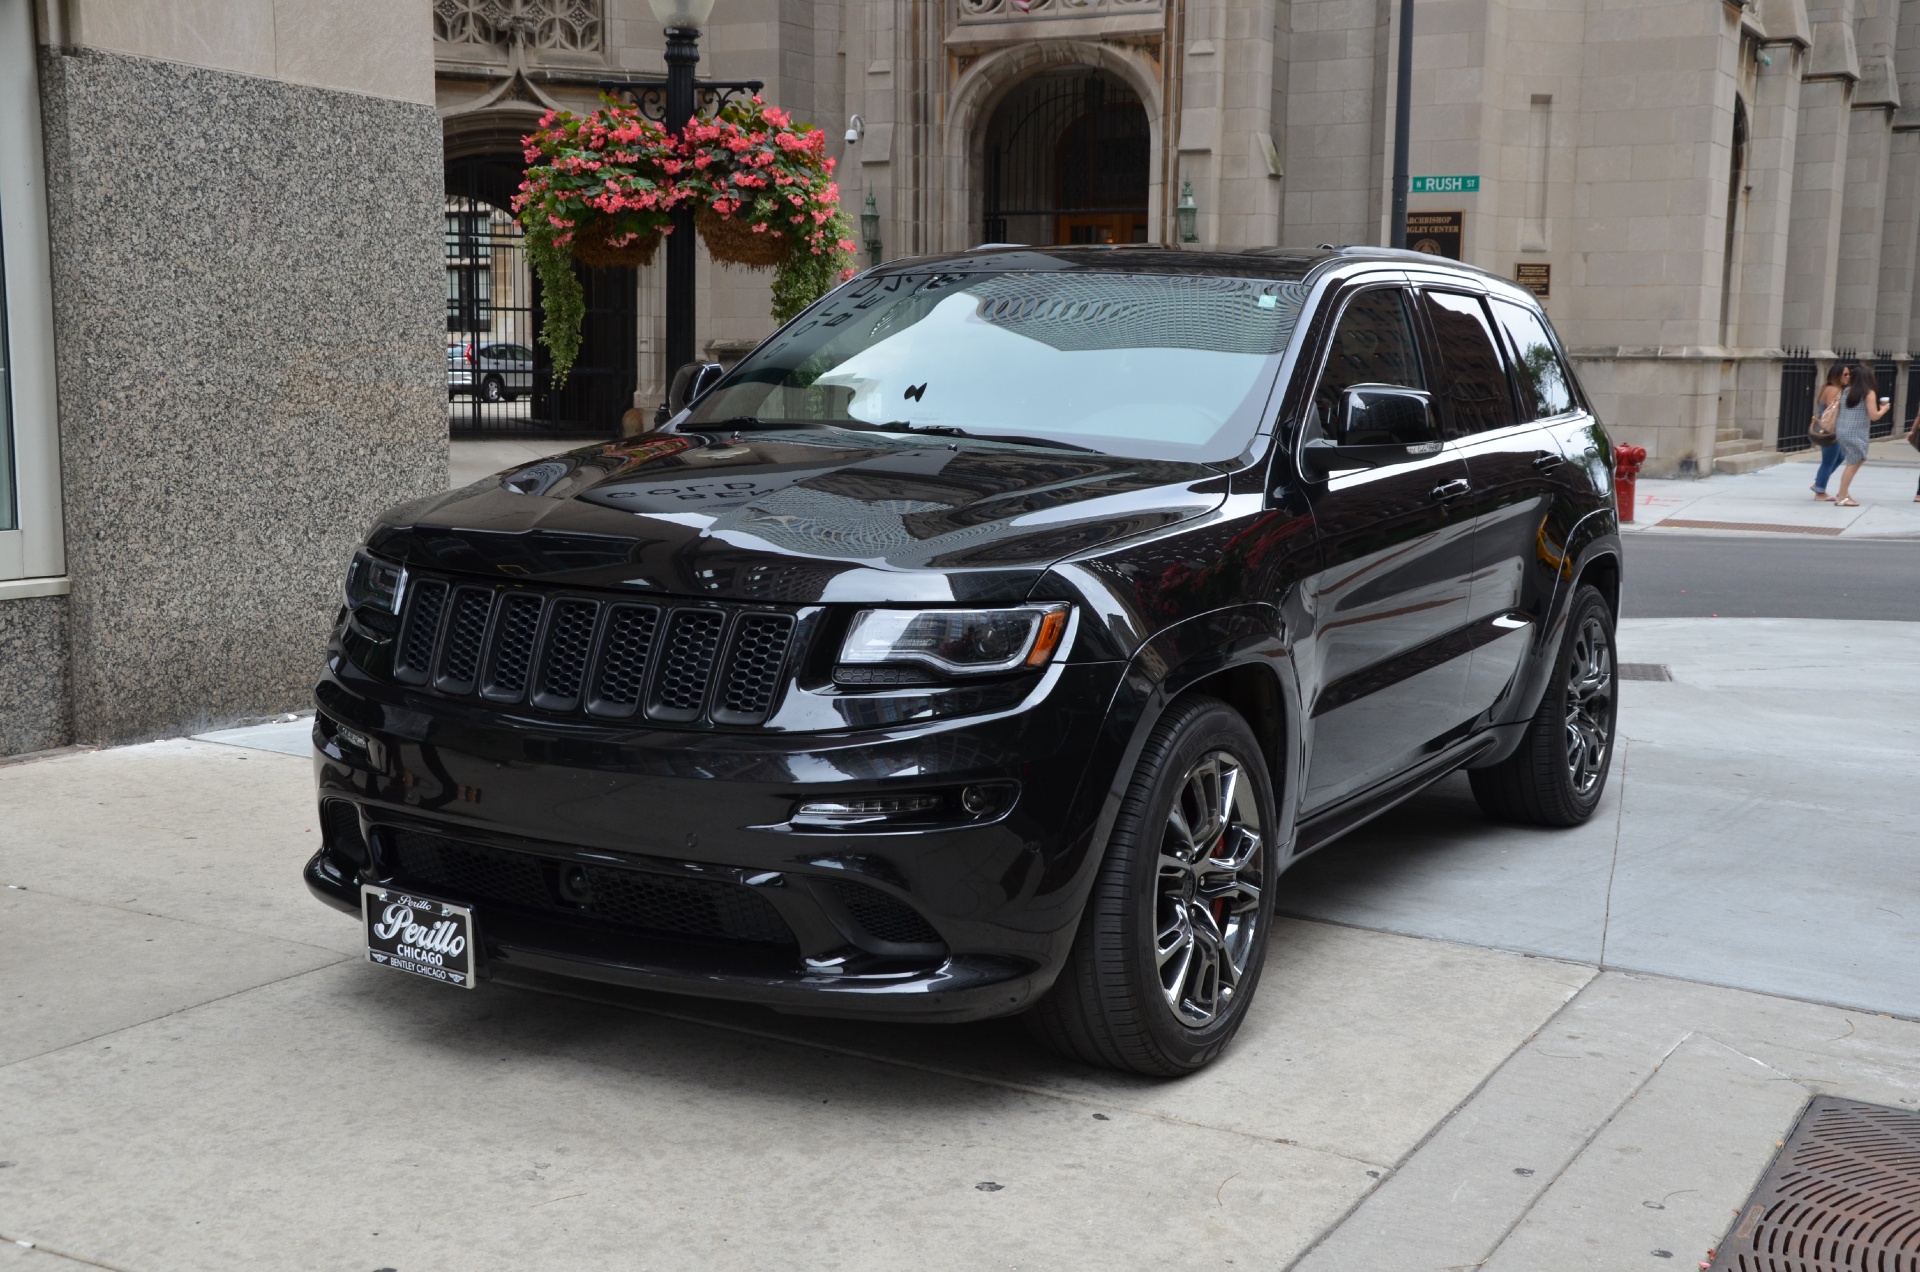 2014 Jeep Grand Cherokee SRT Stock # M455A for sale near Chicago, IL ...